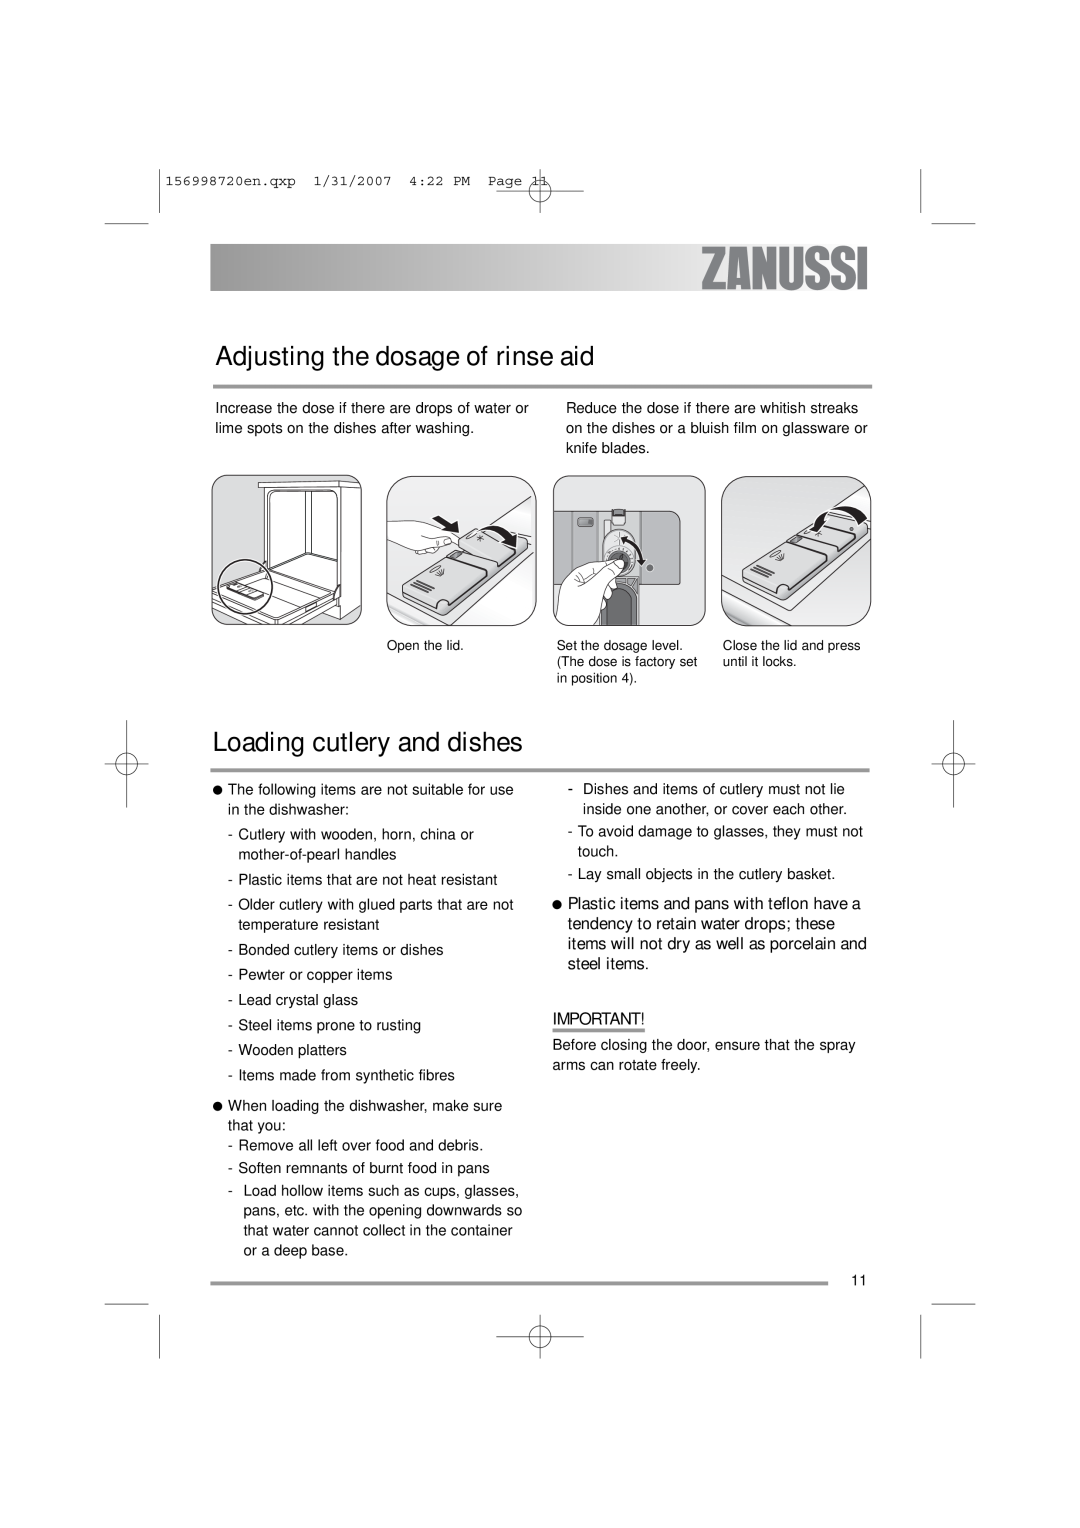 Zanussi ZDI 100 manual Adjusting the dosage of rinse aid, Loading cutlery and dishes 